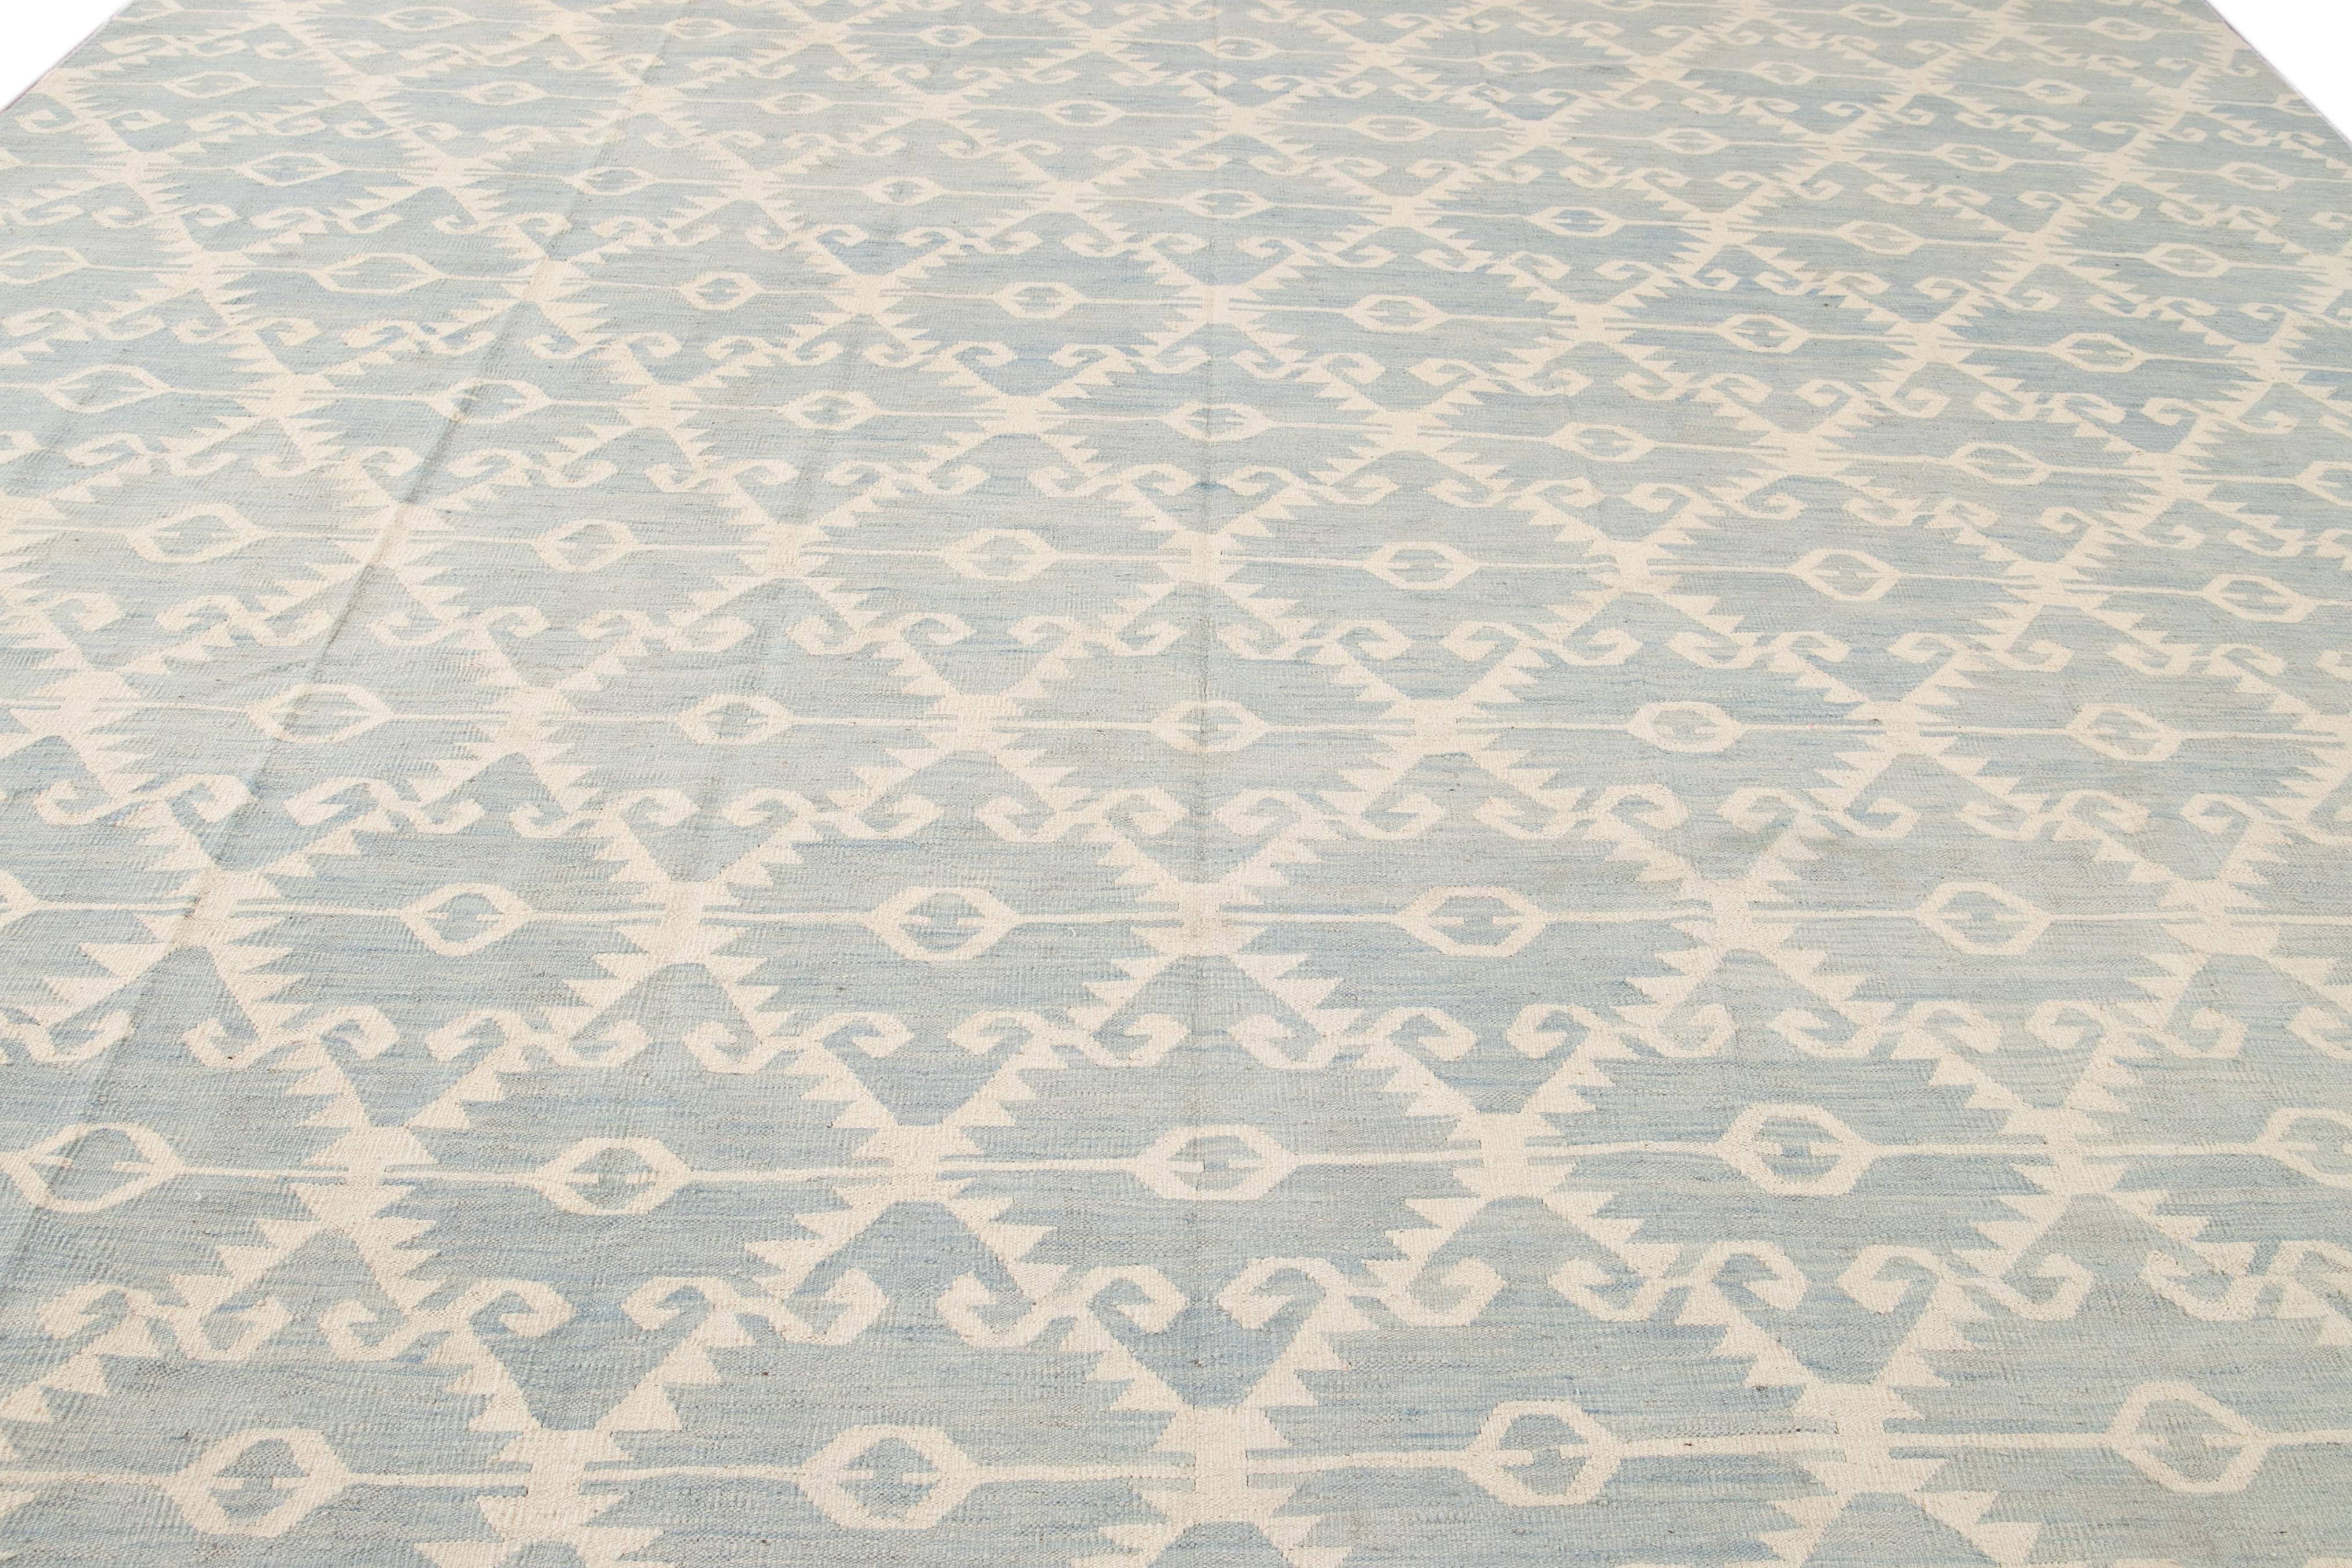 This premium wool Kilim flatweave rug displays a stunning modern beige motif. It features a light blue background with a comprehensive tribal pattern.

This rug measures 12'1